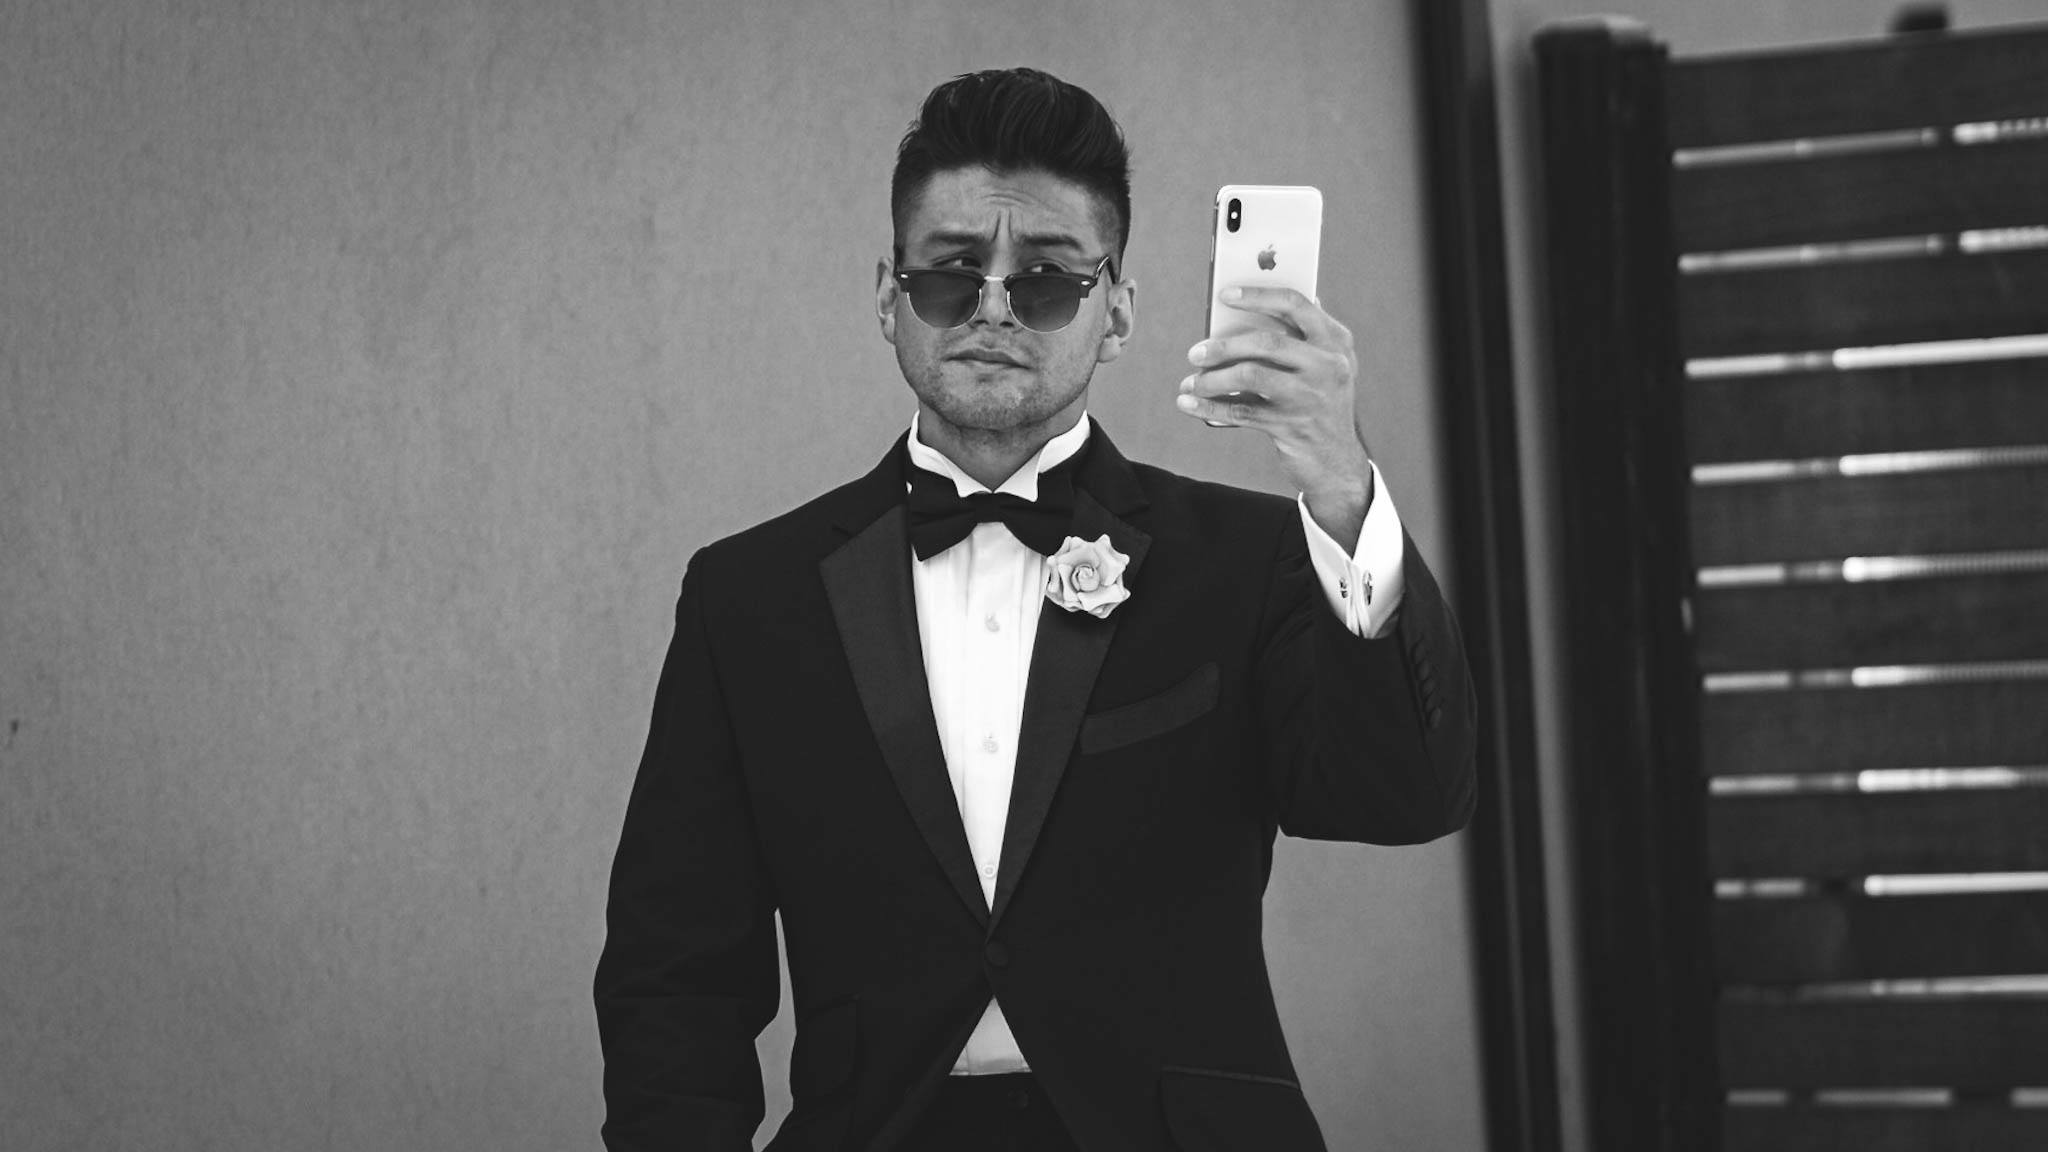 Black and white photo - man in tuxedo holding a phone - man in sunglasses - man in tuxedo with sunglasses - man in bow tie - black bow tie - dandy in the Bronx